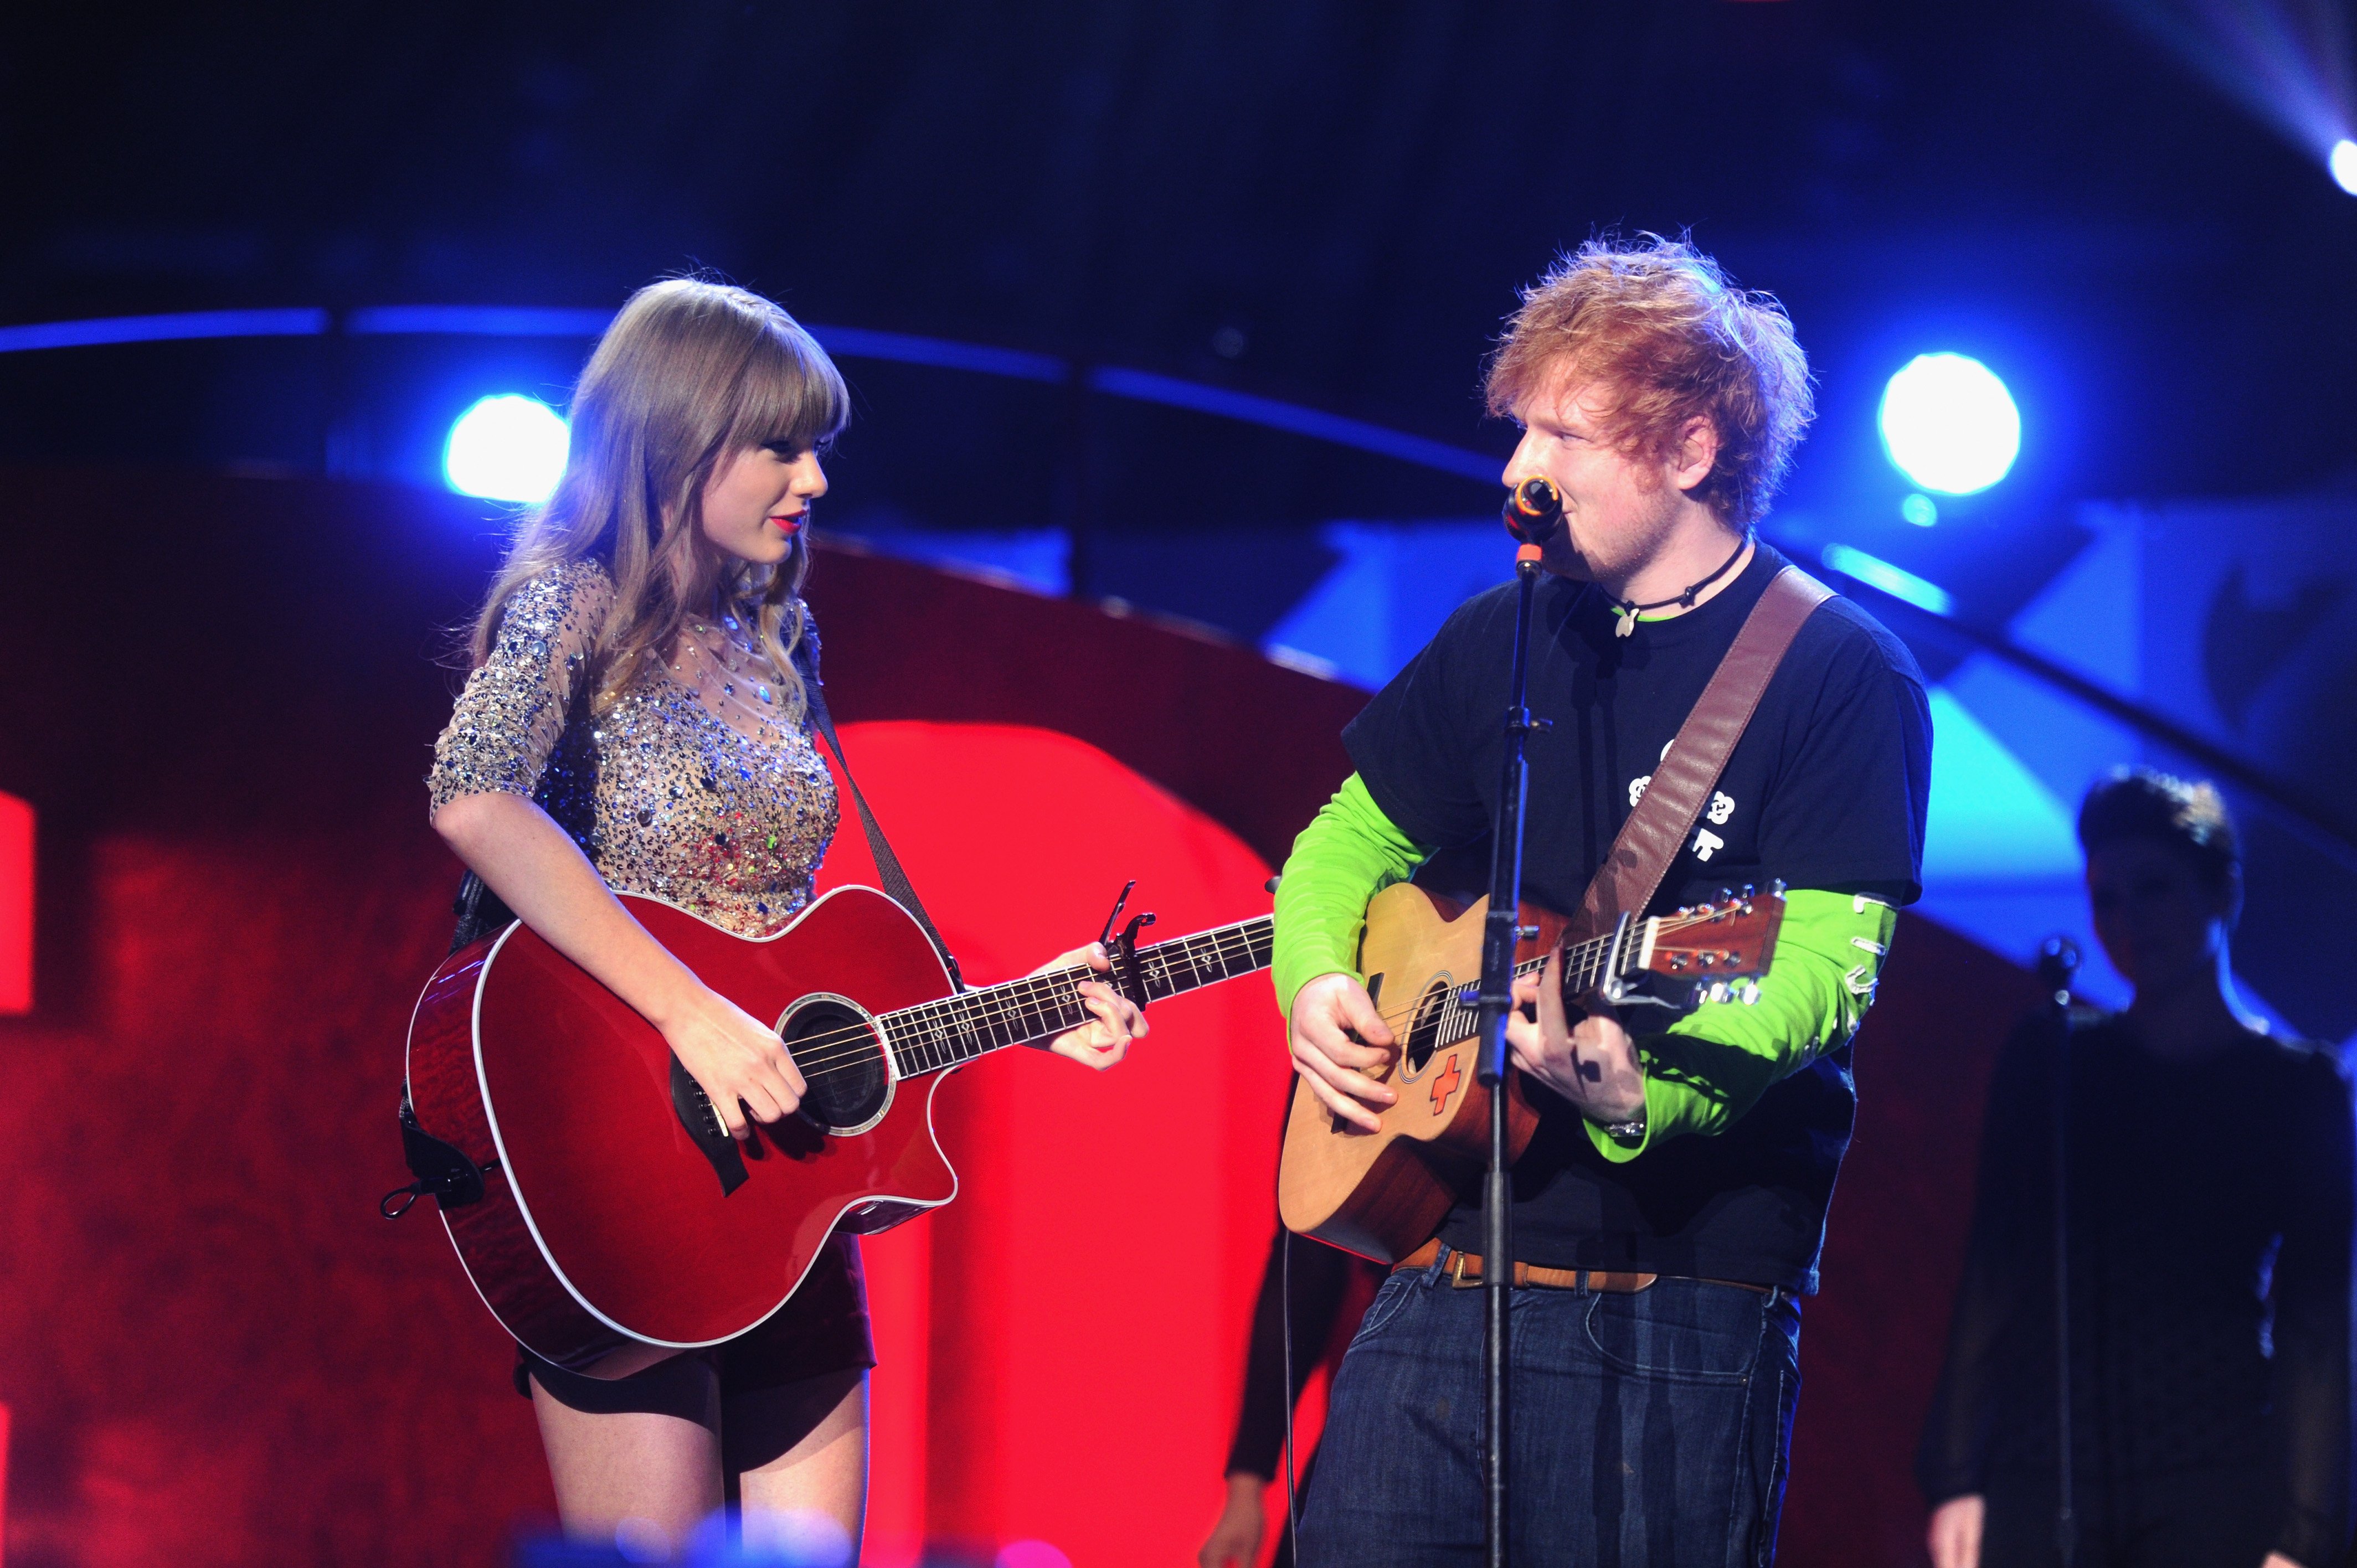 Taylor Swift and Ed Sheeran perform on stage during Z100's Jingle Ball 2012